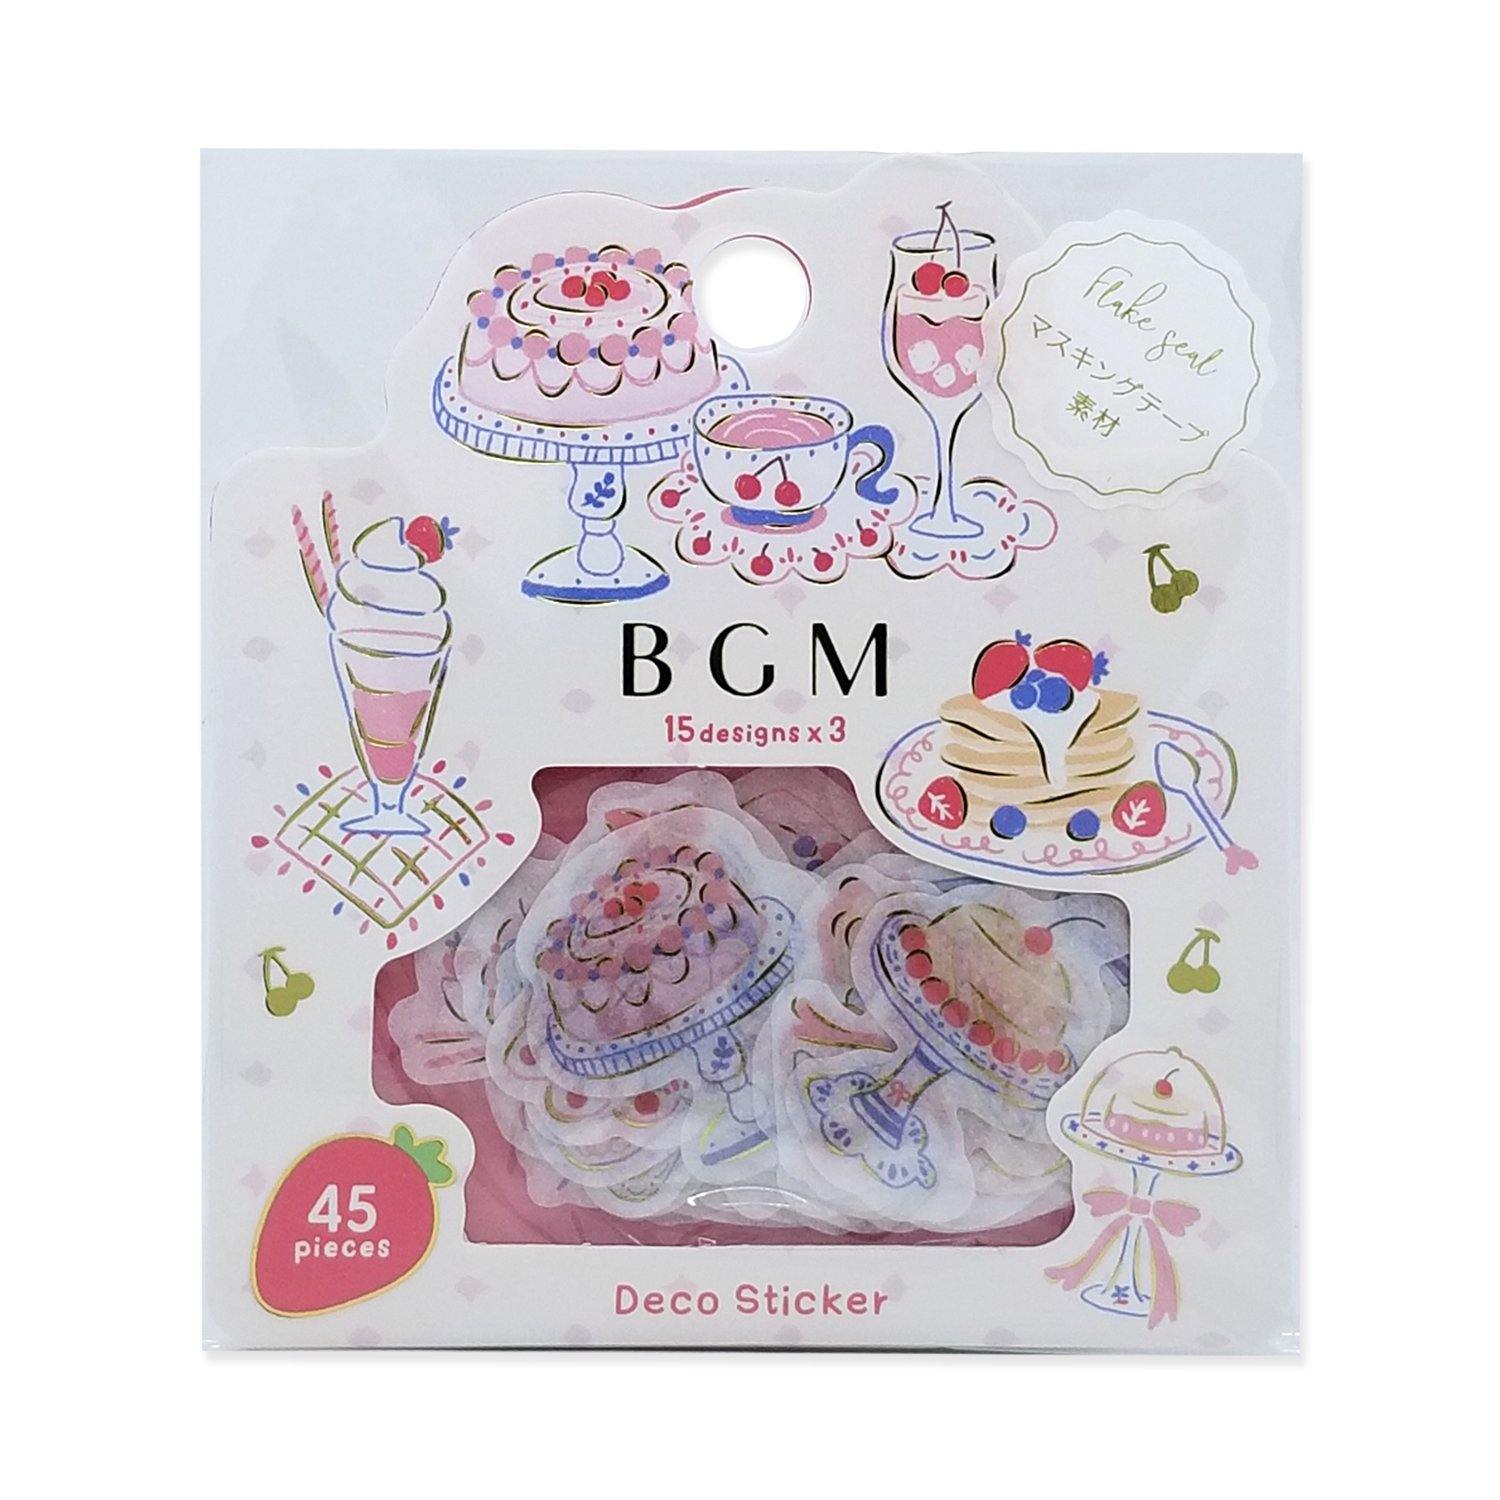 Otome Tea Party - BGM Washi Sticker Flake SEAL Foil Stamping | papermindstationery.com